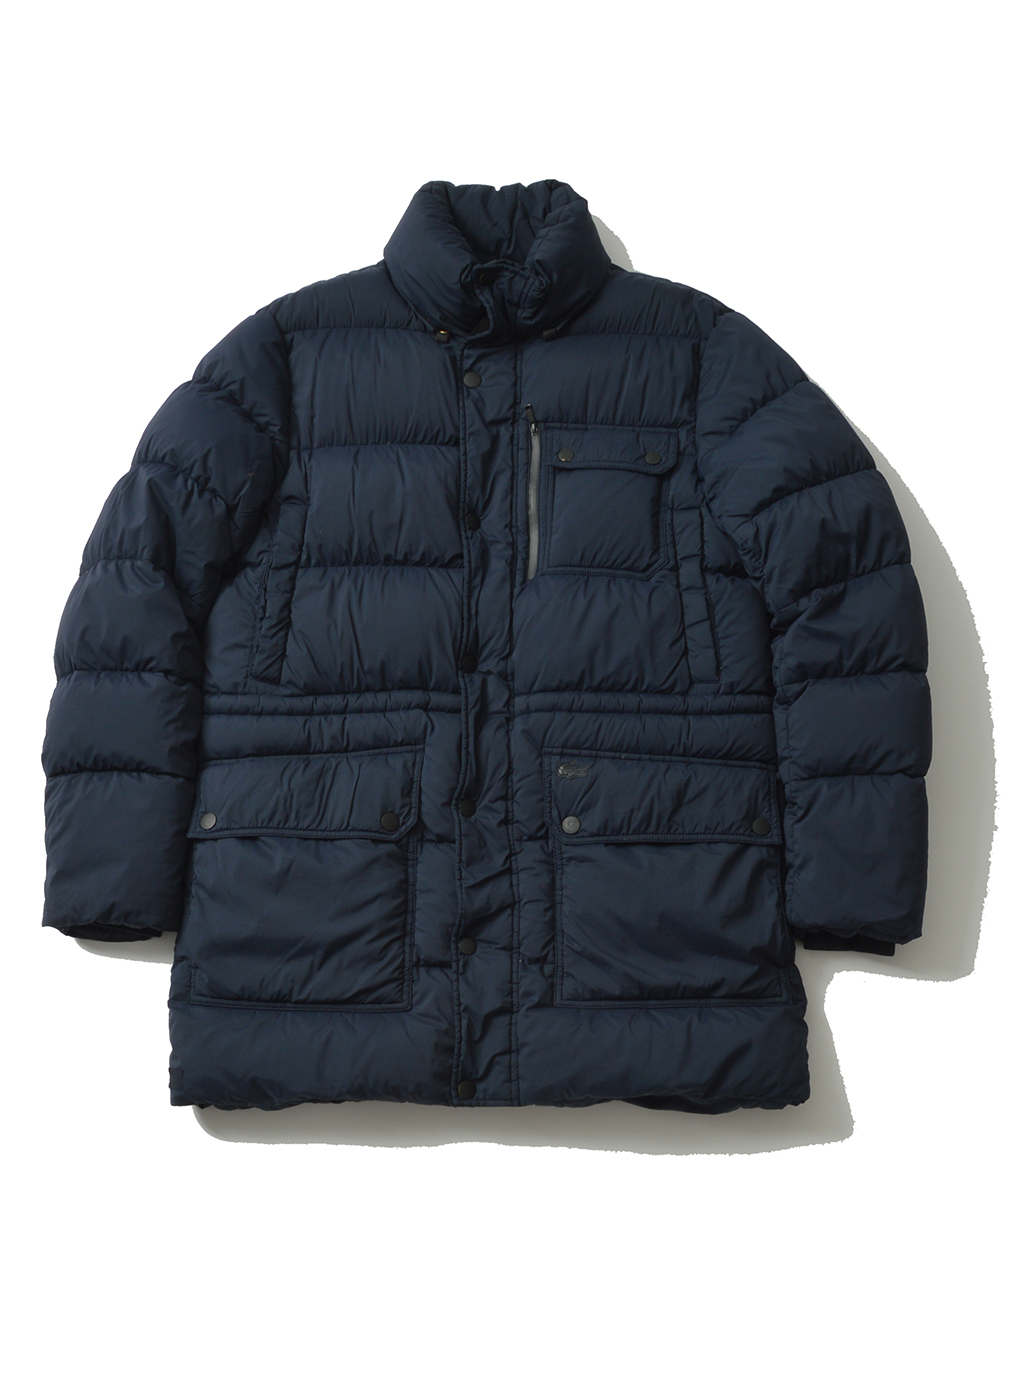 LACOSTE goose down puffer padding jacket (80 :20)